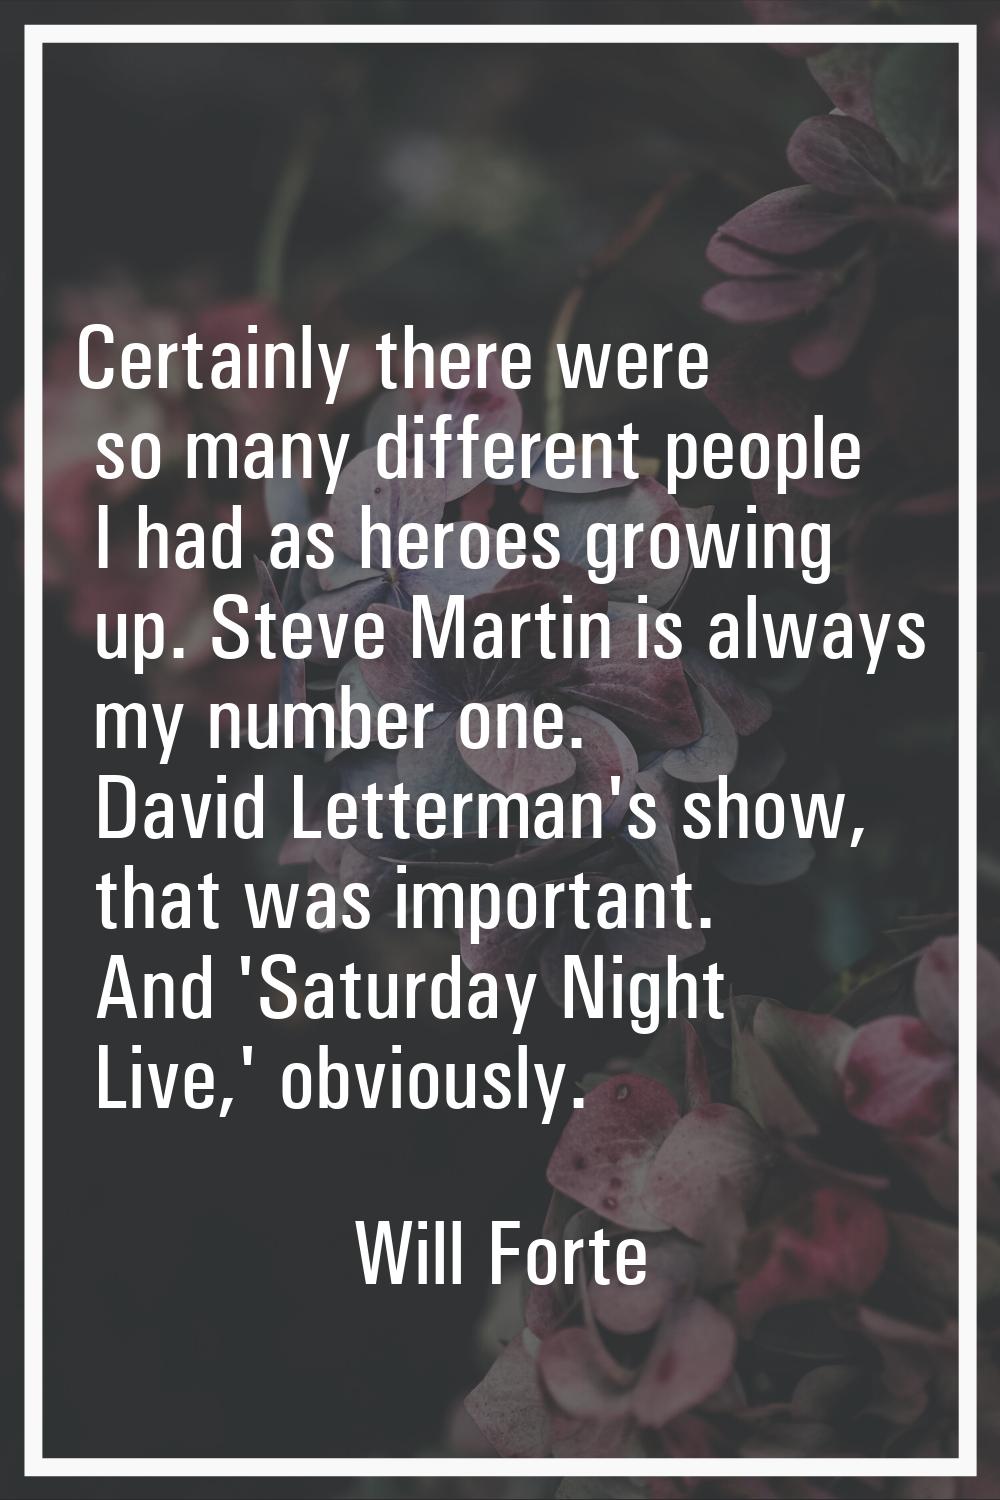 Certainly there were so many different people I had as heroes growing up. Steve Martin is always my